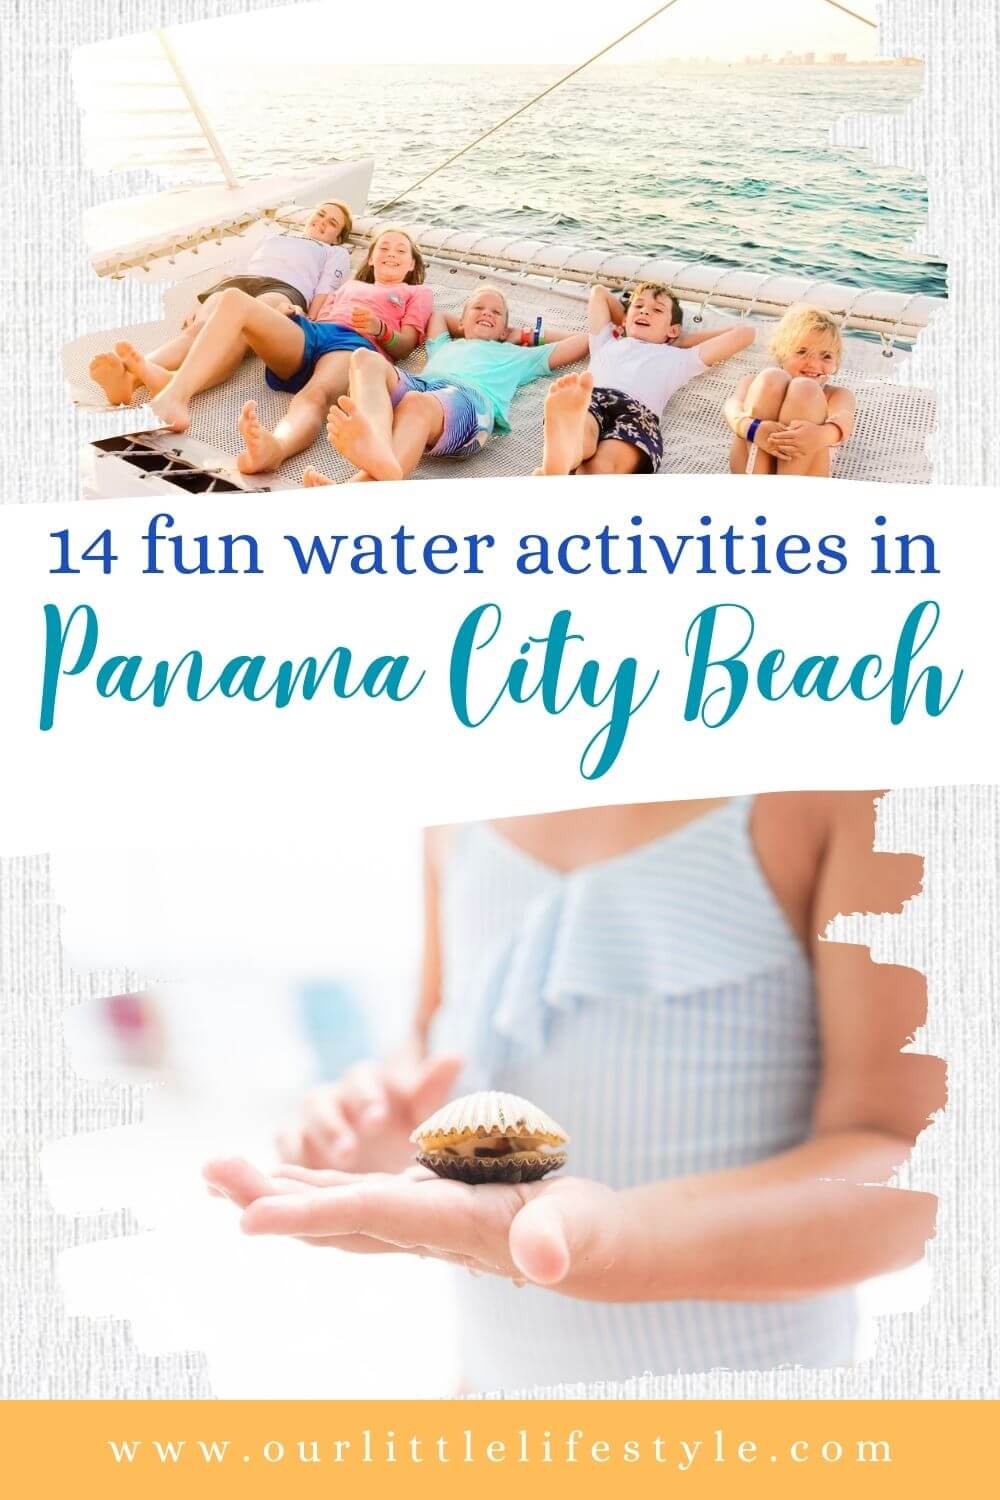 Exciting Panama City Beach Water Activities in Florida